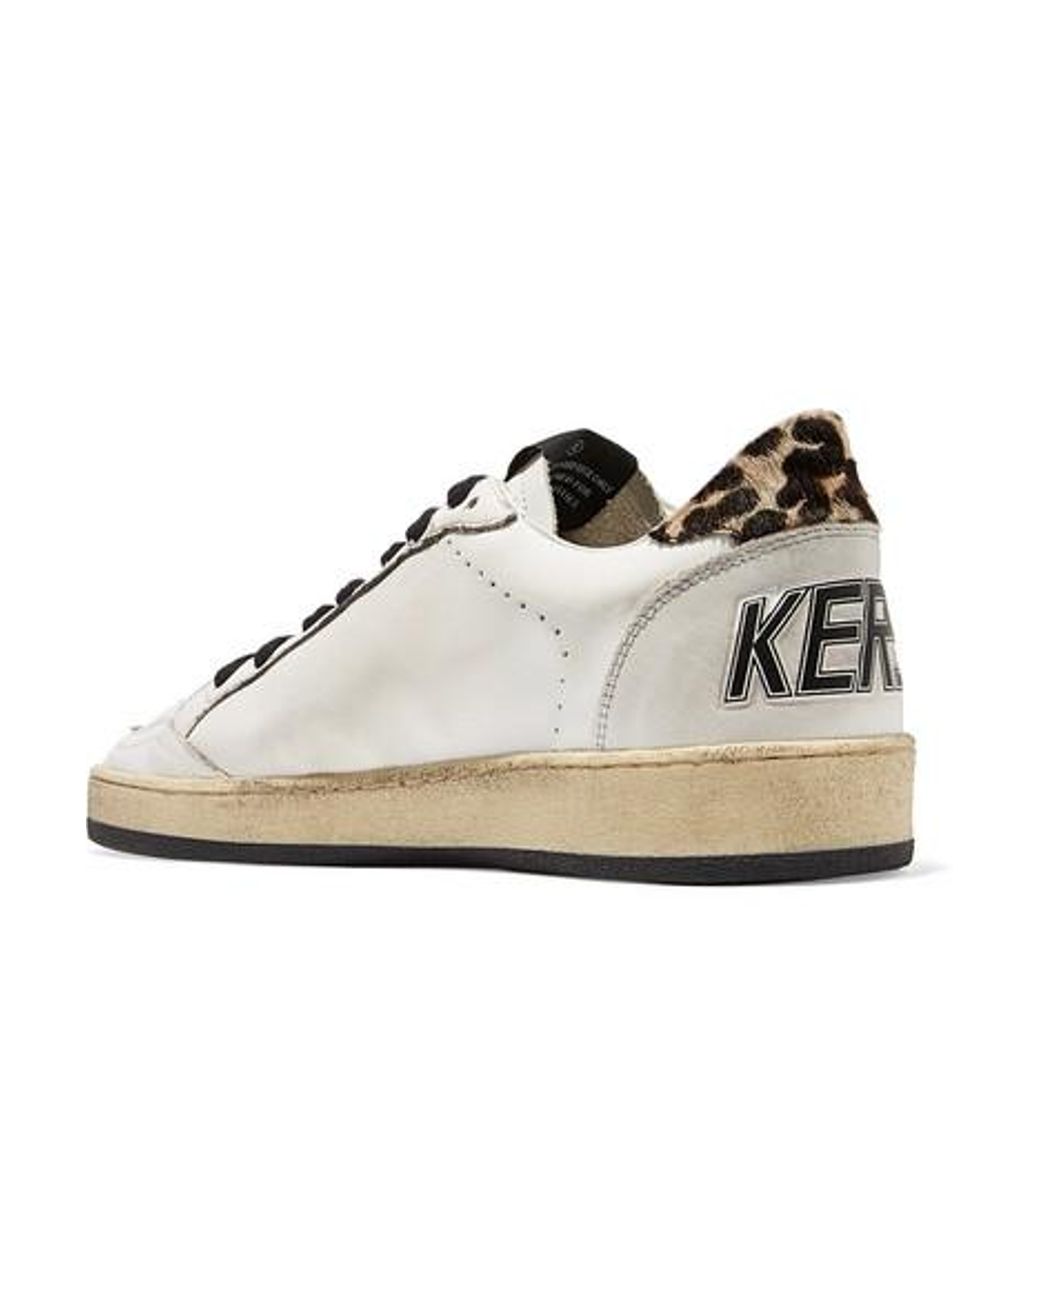 Golden Goose Ball Star Leopard-print Calf Hair And Leather Sneakers in White  | Lyst